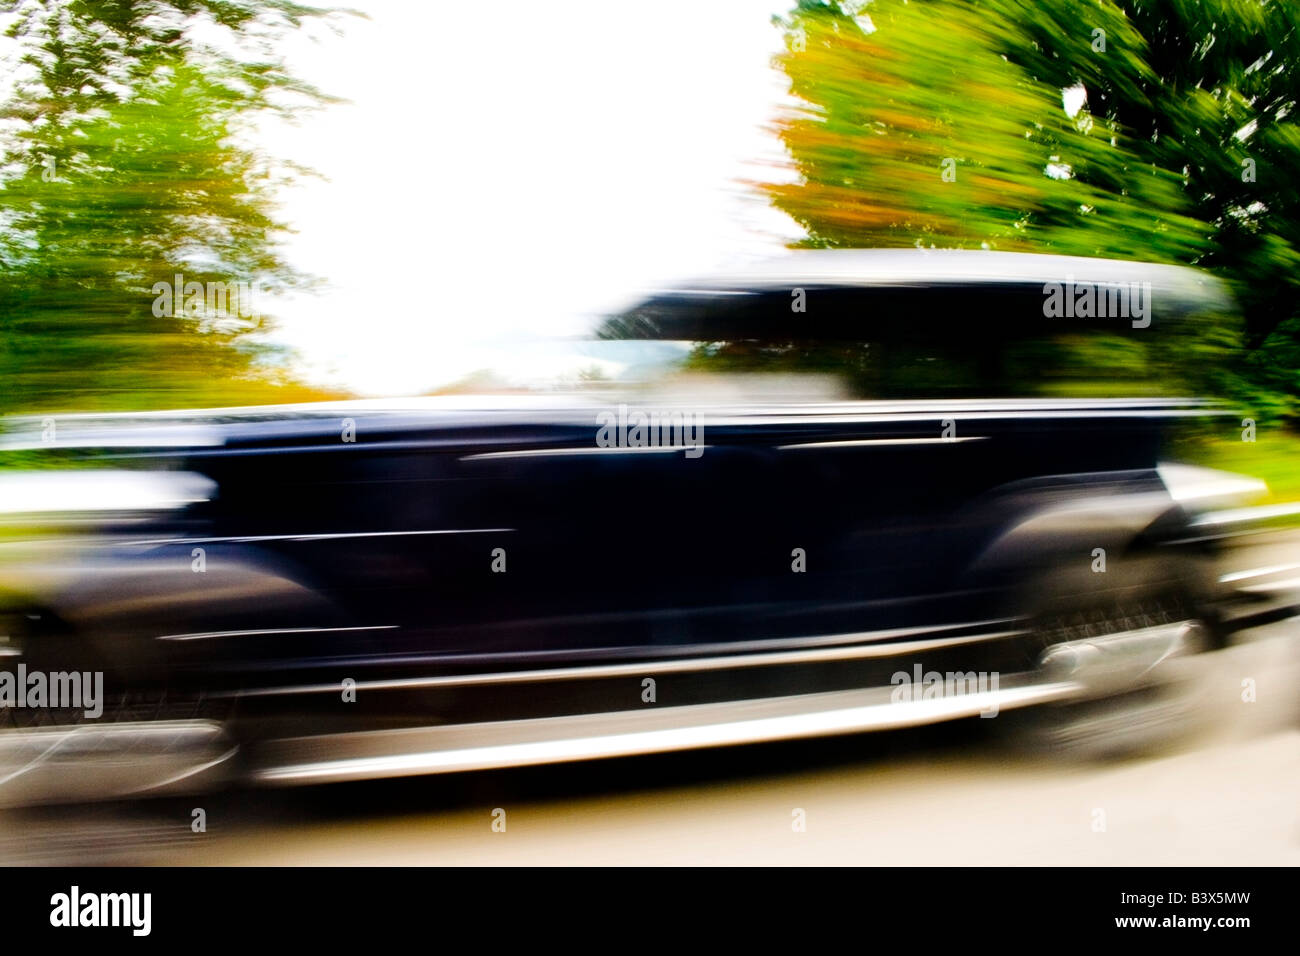 Motion blurred image of a speeding classic car Stock Photo